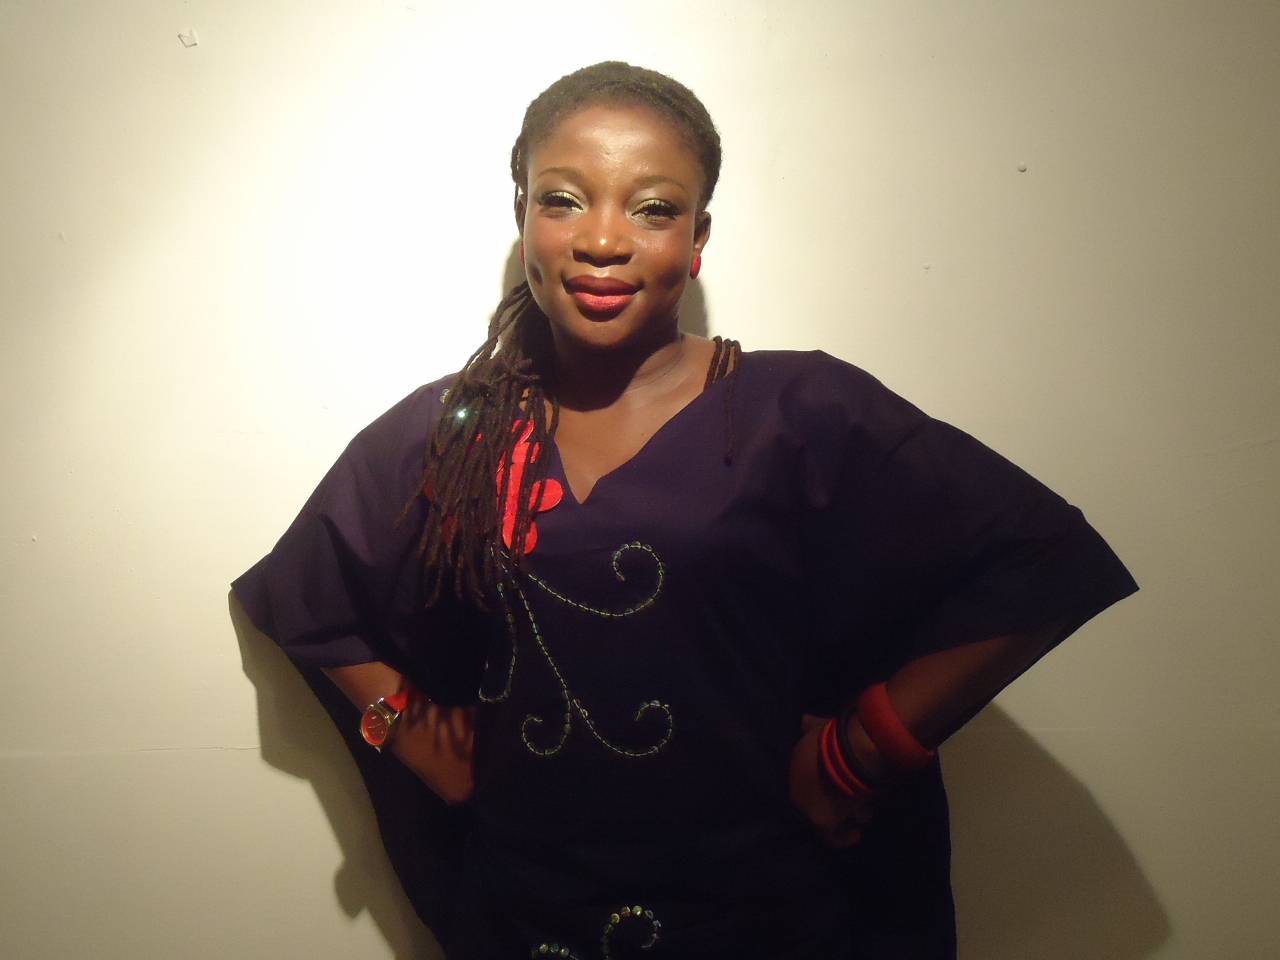 A Platform of Expression: An Interview With Jumoke Alawonde-James